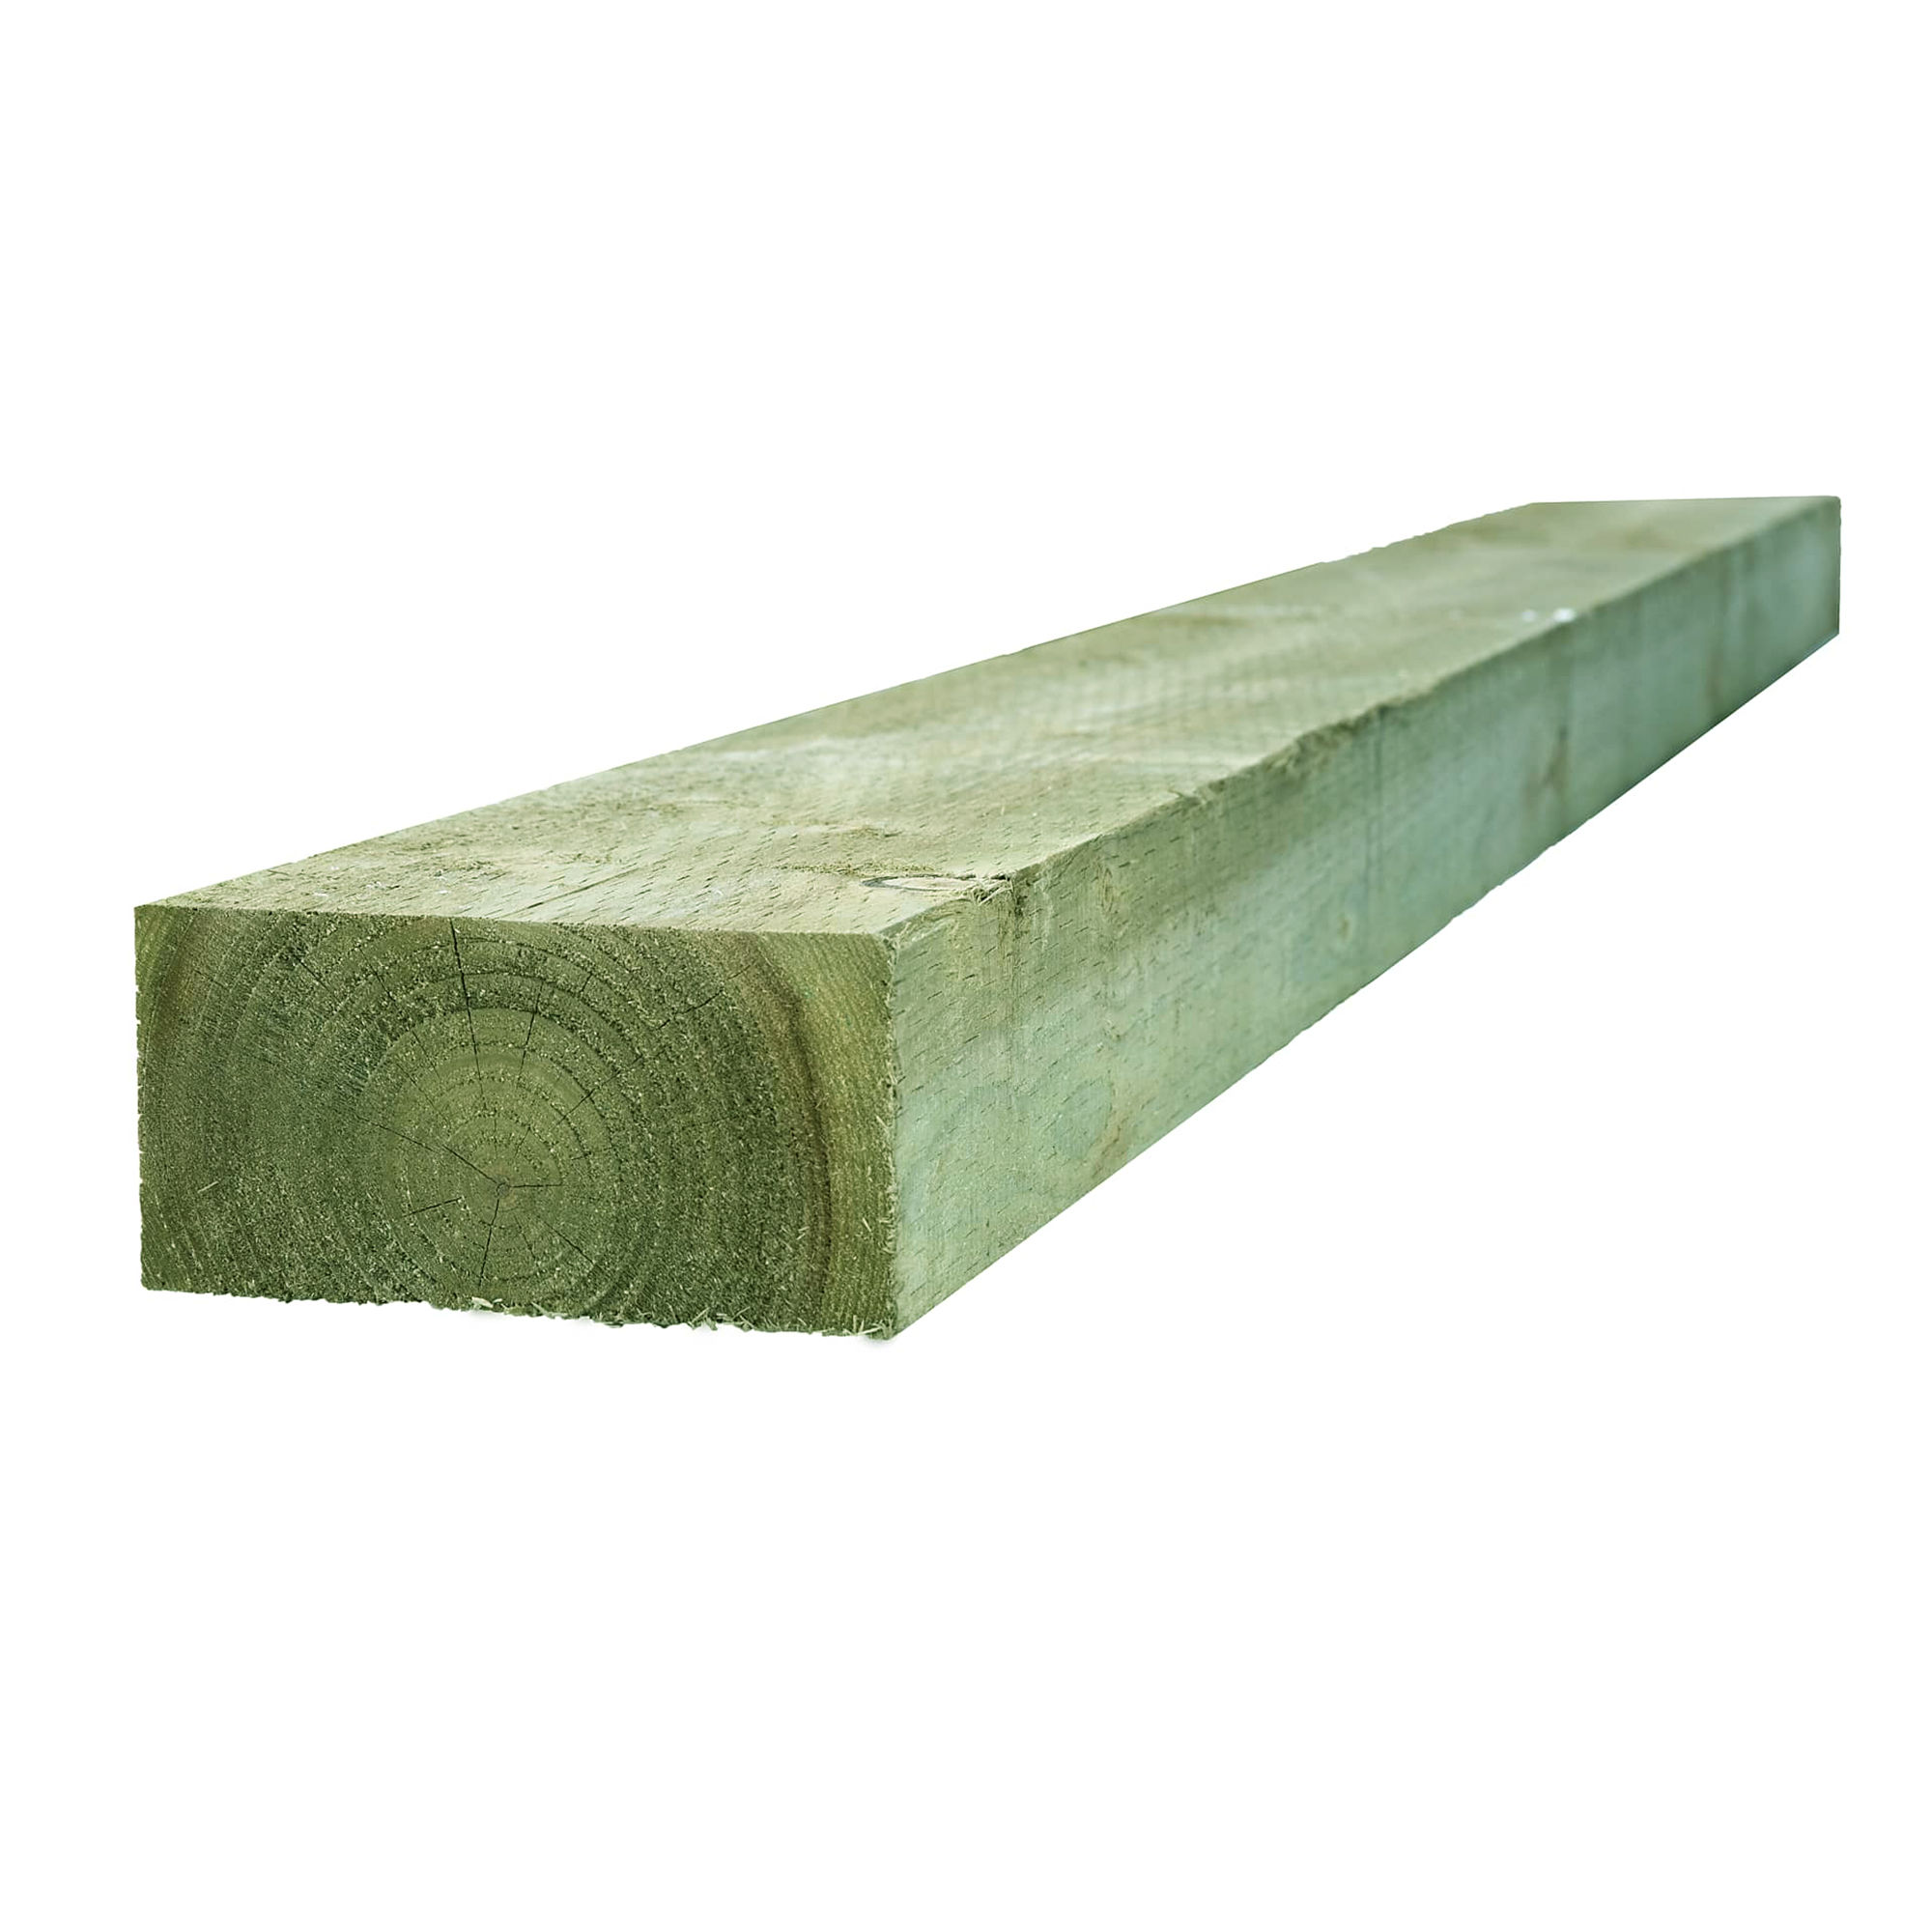 Garden Sleeper Treated Softwood Tanalised Green 120mm x 245mm (Finished Size)